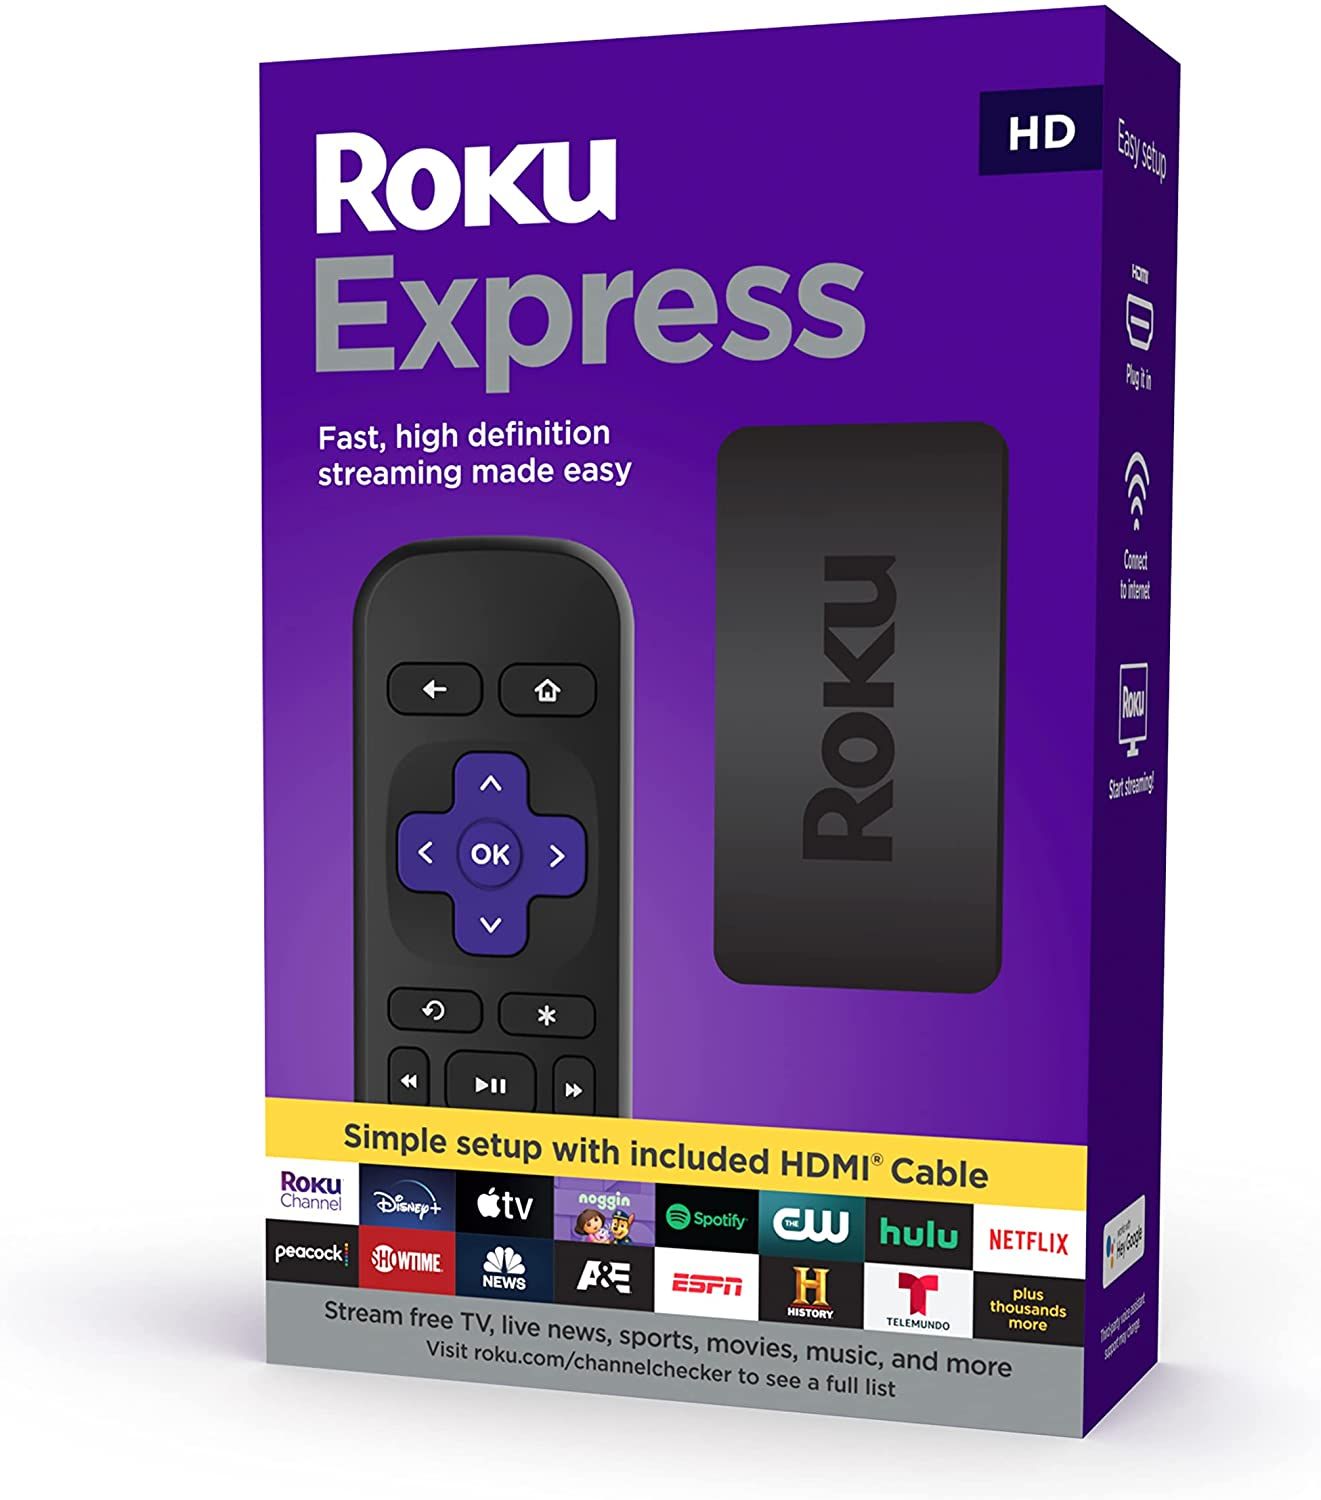 The complete package of Roku Express